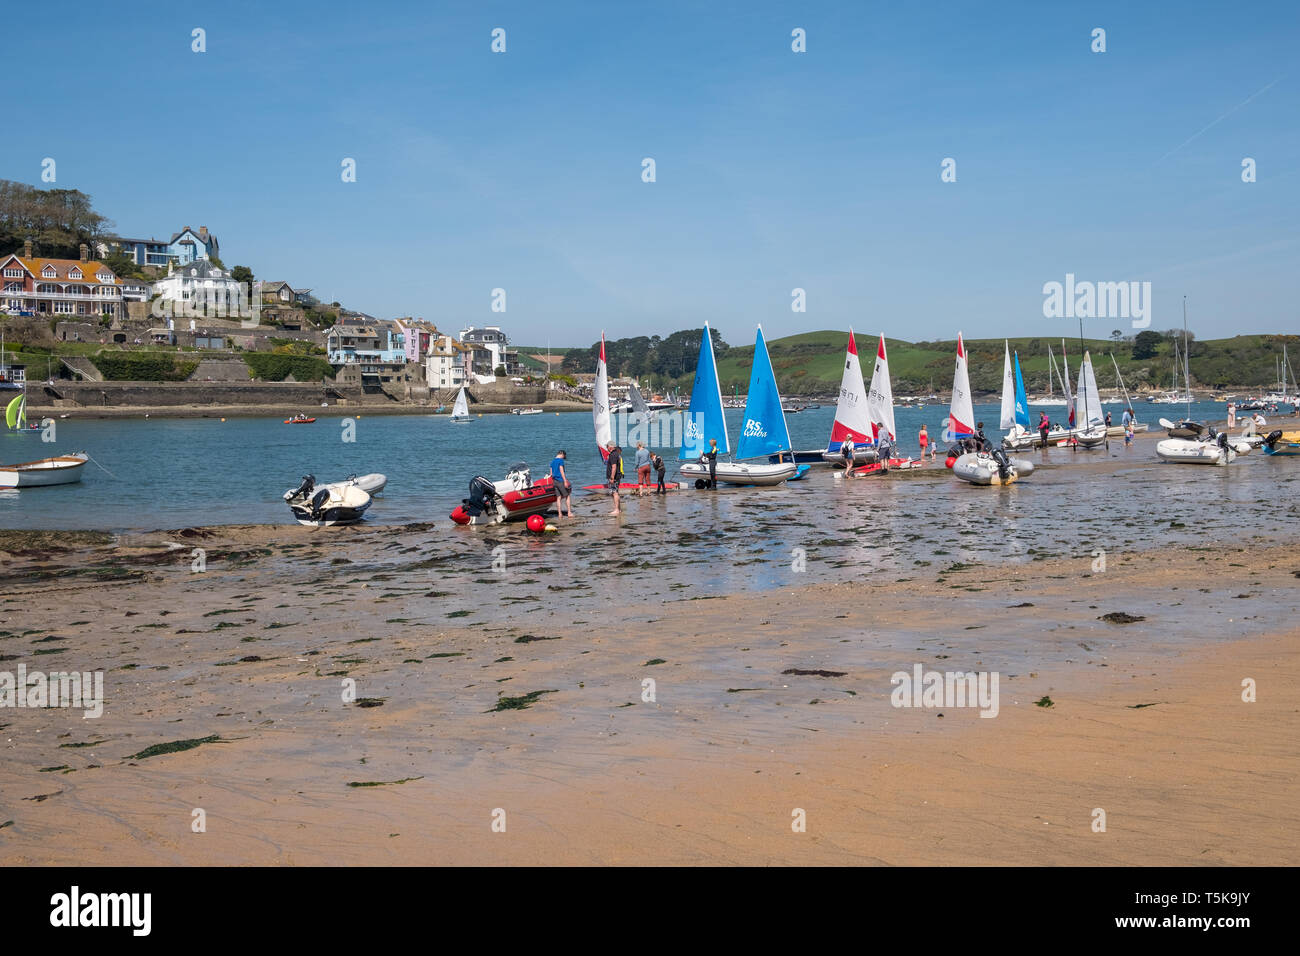 Sailing dinghies lined up on the beach at East Portlemouth on the Salcombe estuary, South Hams, Devon, UK Stock Photo